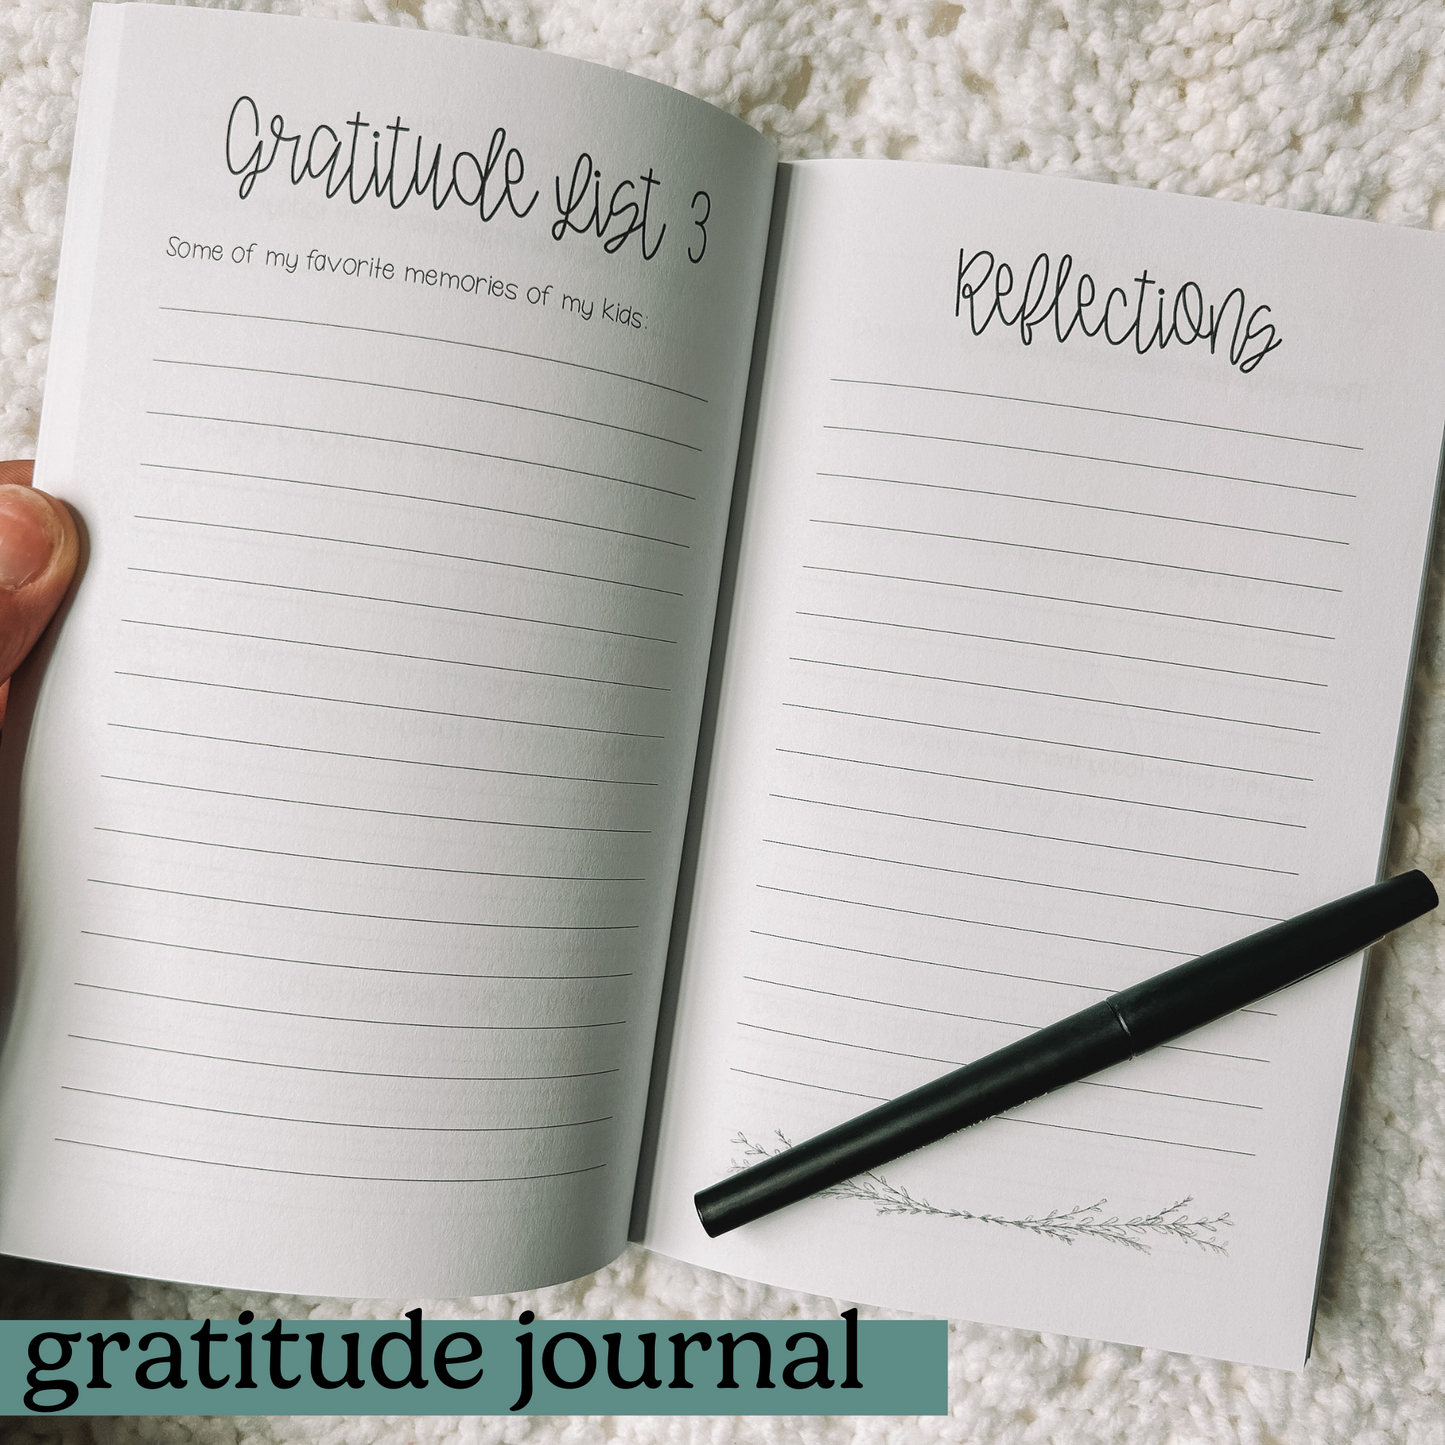 Gratitude list three is Some of my favorite memories of my kids with a full lined page. Opposite page is titled reflections with a full lined page.